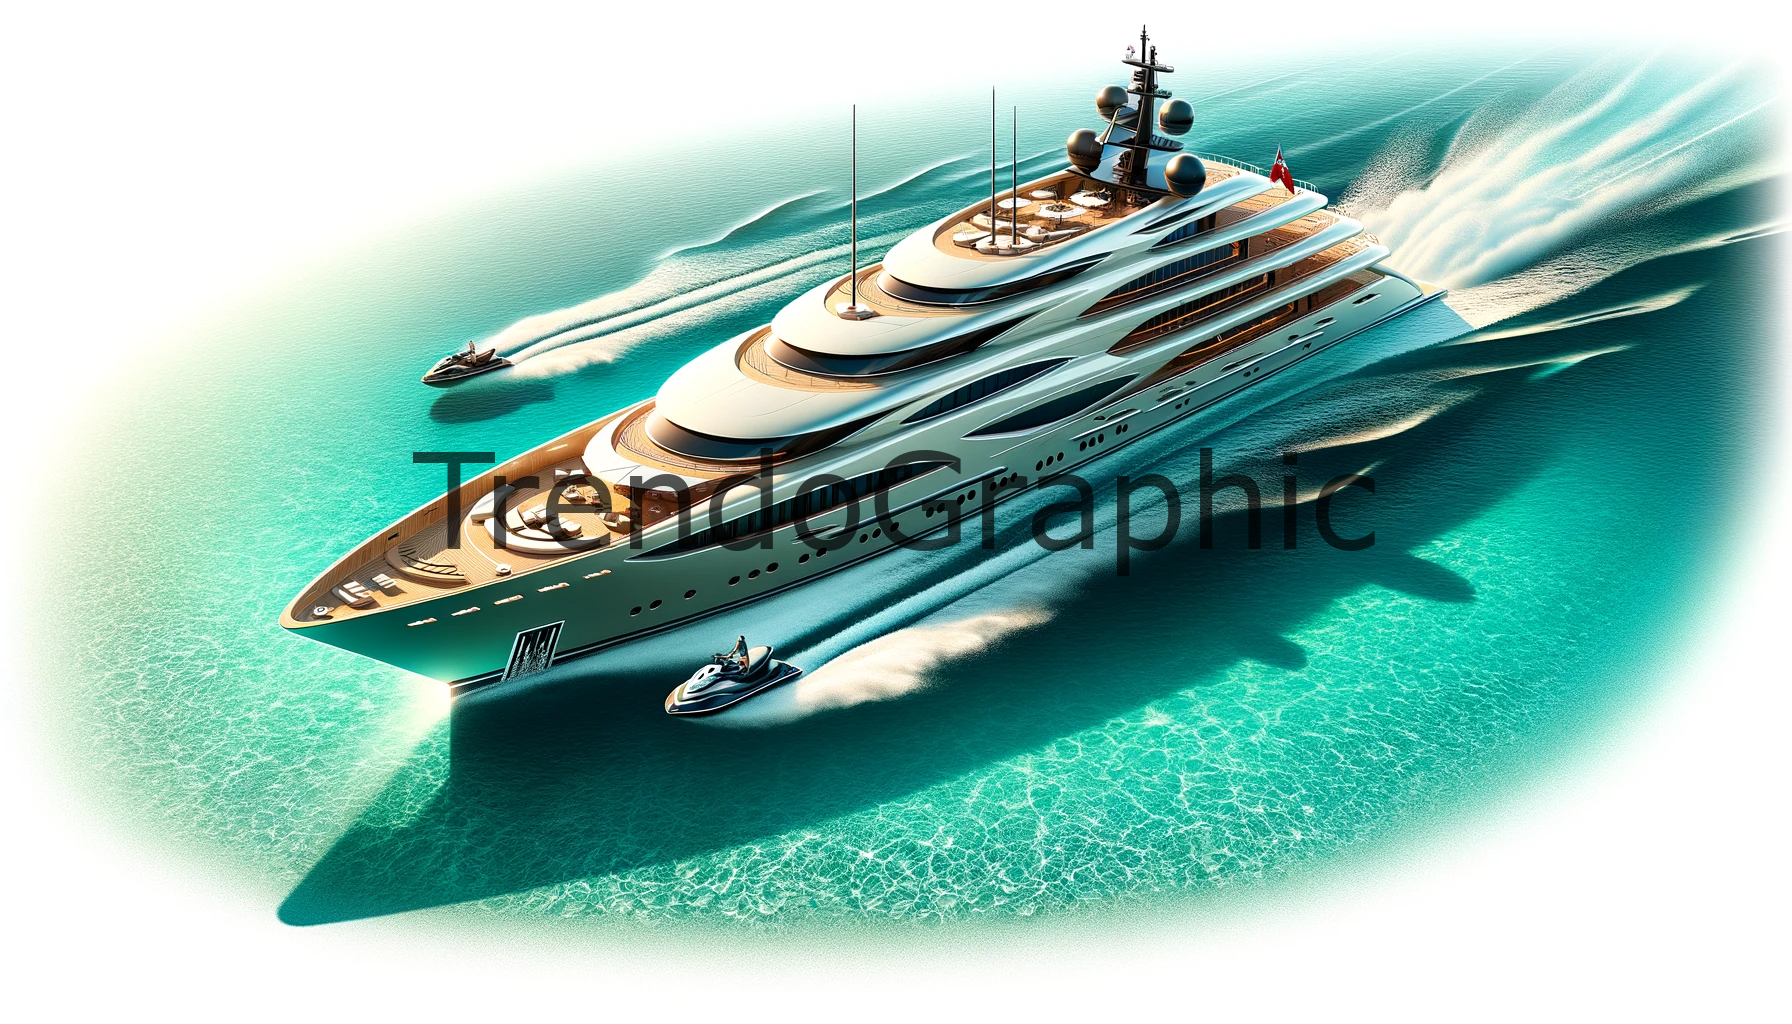 Cruising in Style: The Pinnacle of Superyacht Design